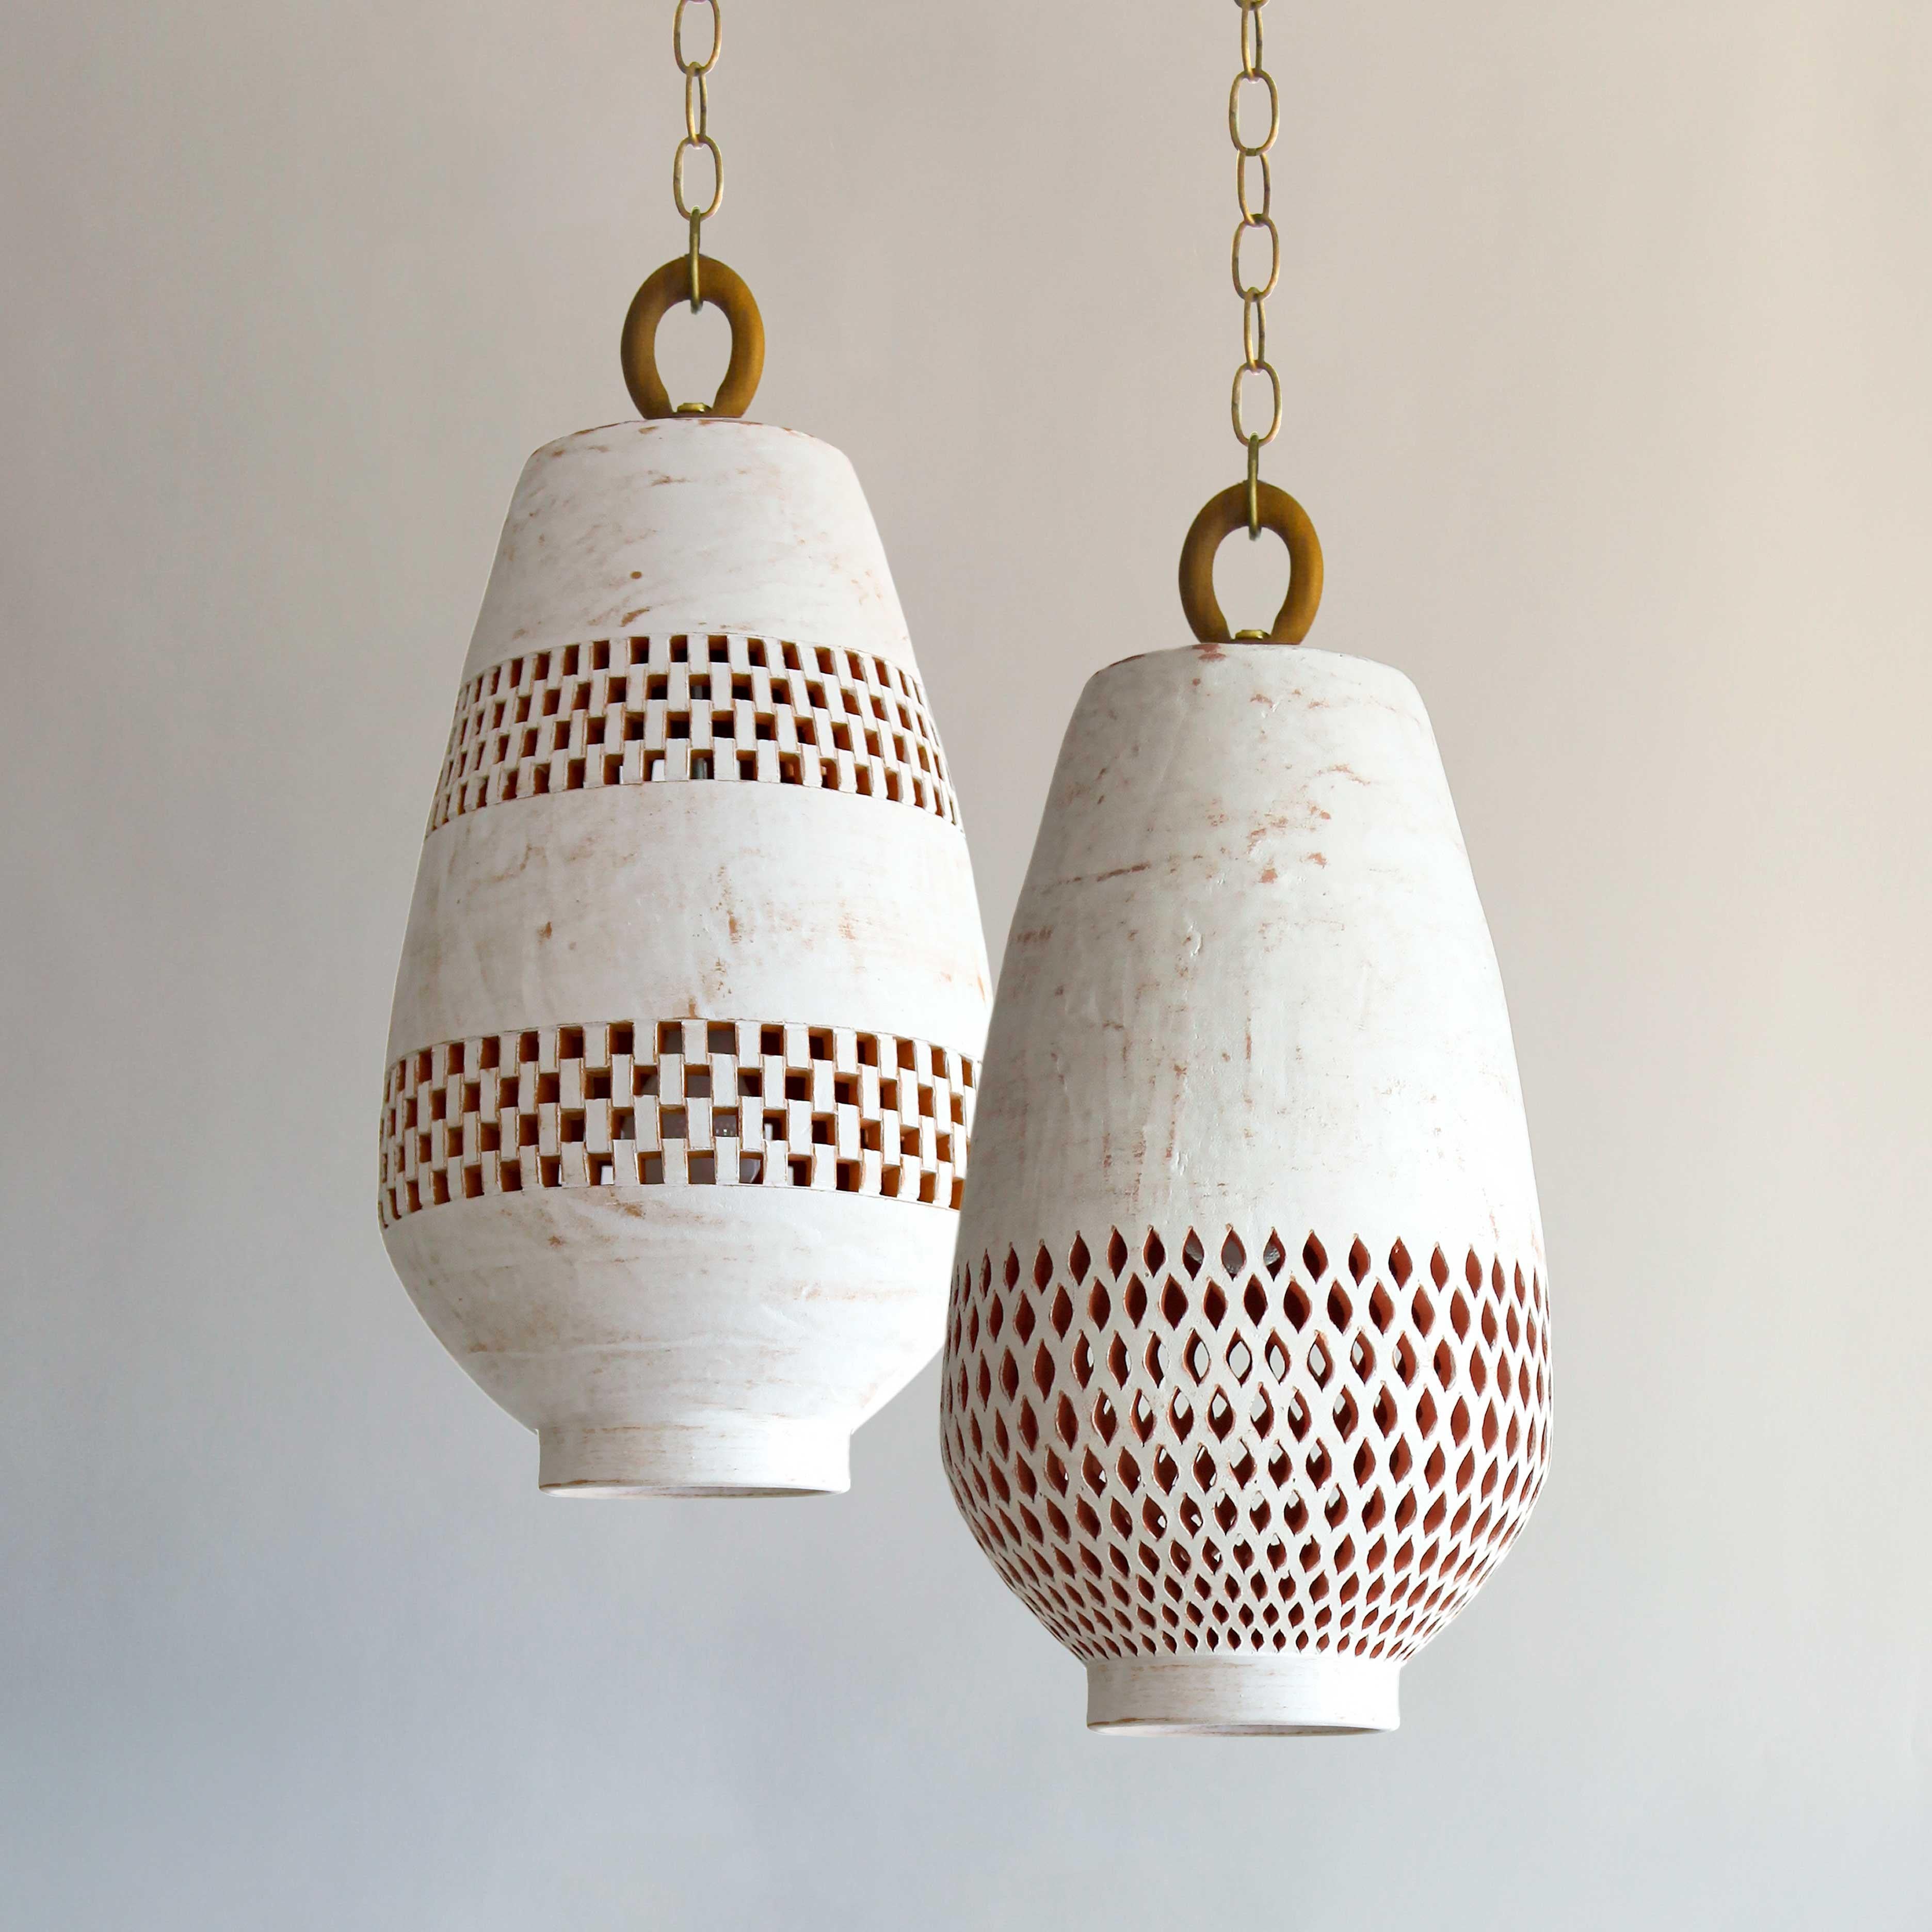 Hand-Crafted White Ceramic Pendant Light XL, Brushed Brass, Ajedrez Atzompa Collection For Sale